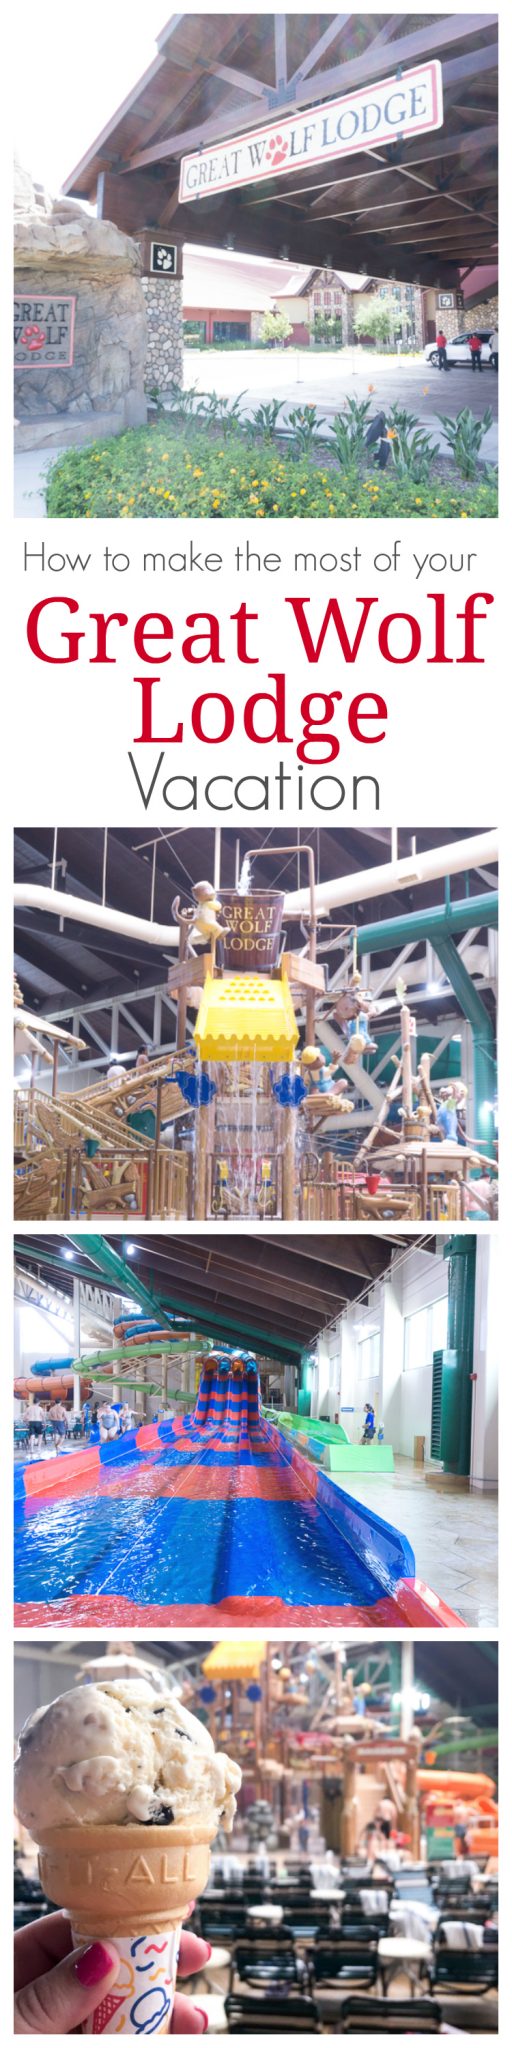 Are you considering a vacation at a Great Wolf Lodge hotel? Make sure to read my tips on how to make the most of your Great Wolf Lodge vacation, there are so many wonderful activities to take advantage of that you don't want to miss out.